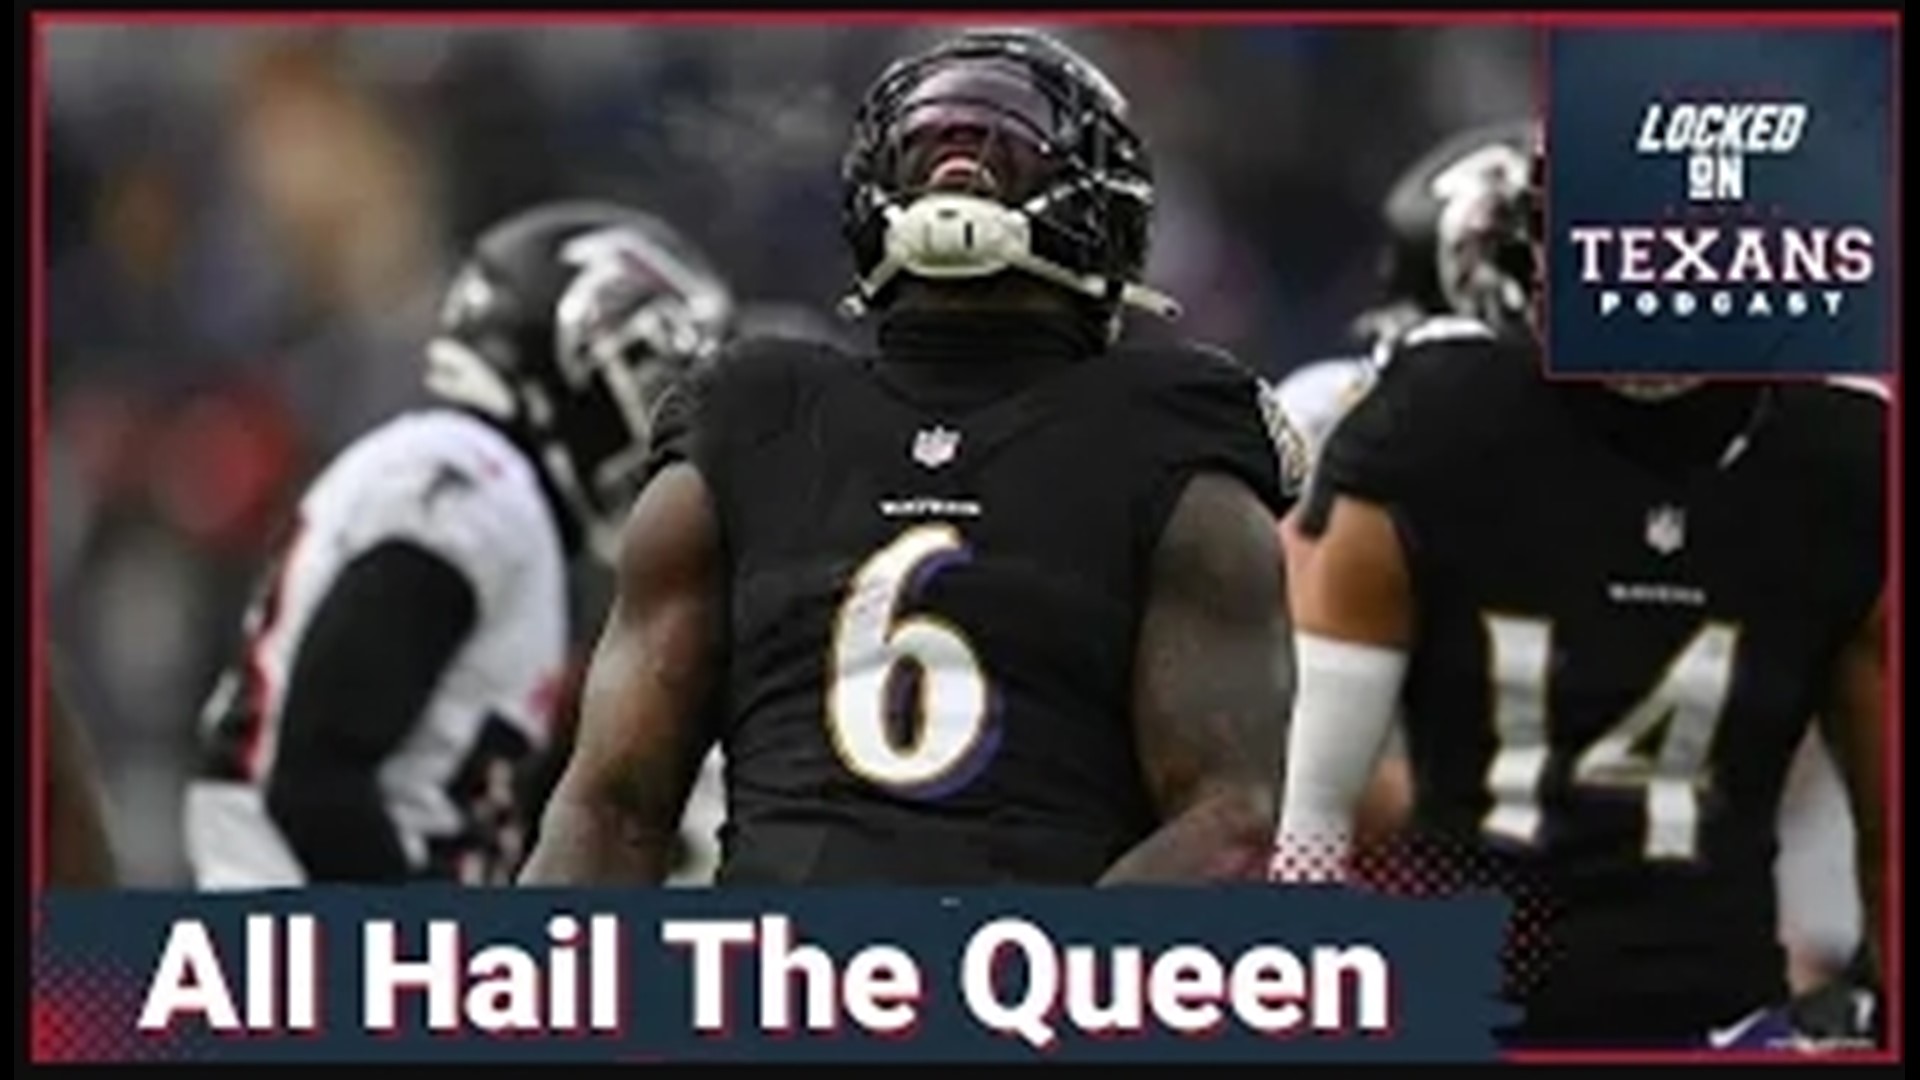 The Baltimore Ravens have a big decision to make when it comes to Patrick Queen's future. But should the Houston Texans take a chance on trading for him?